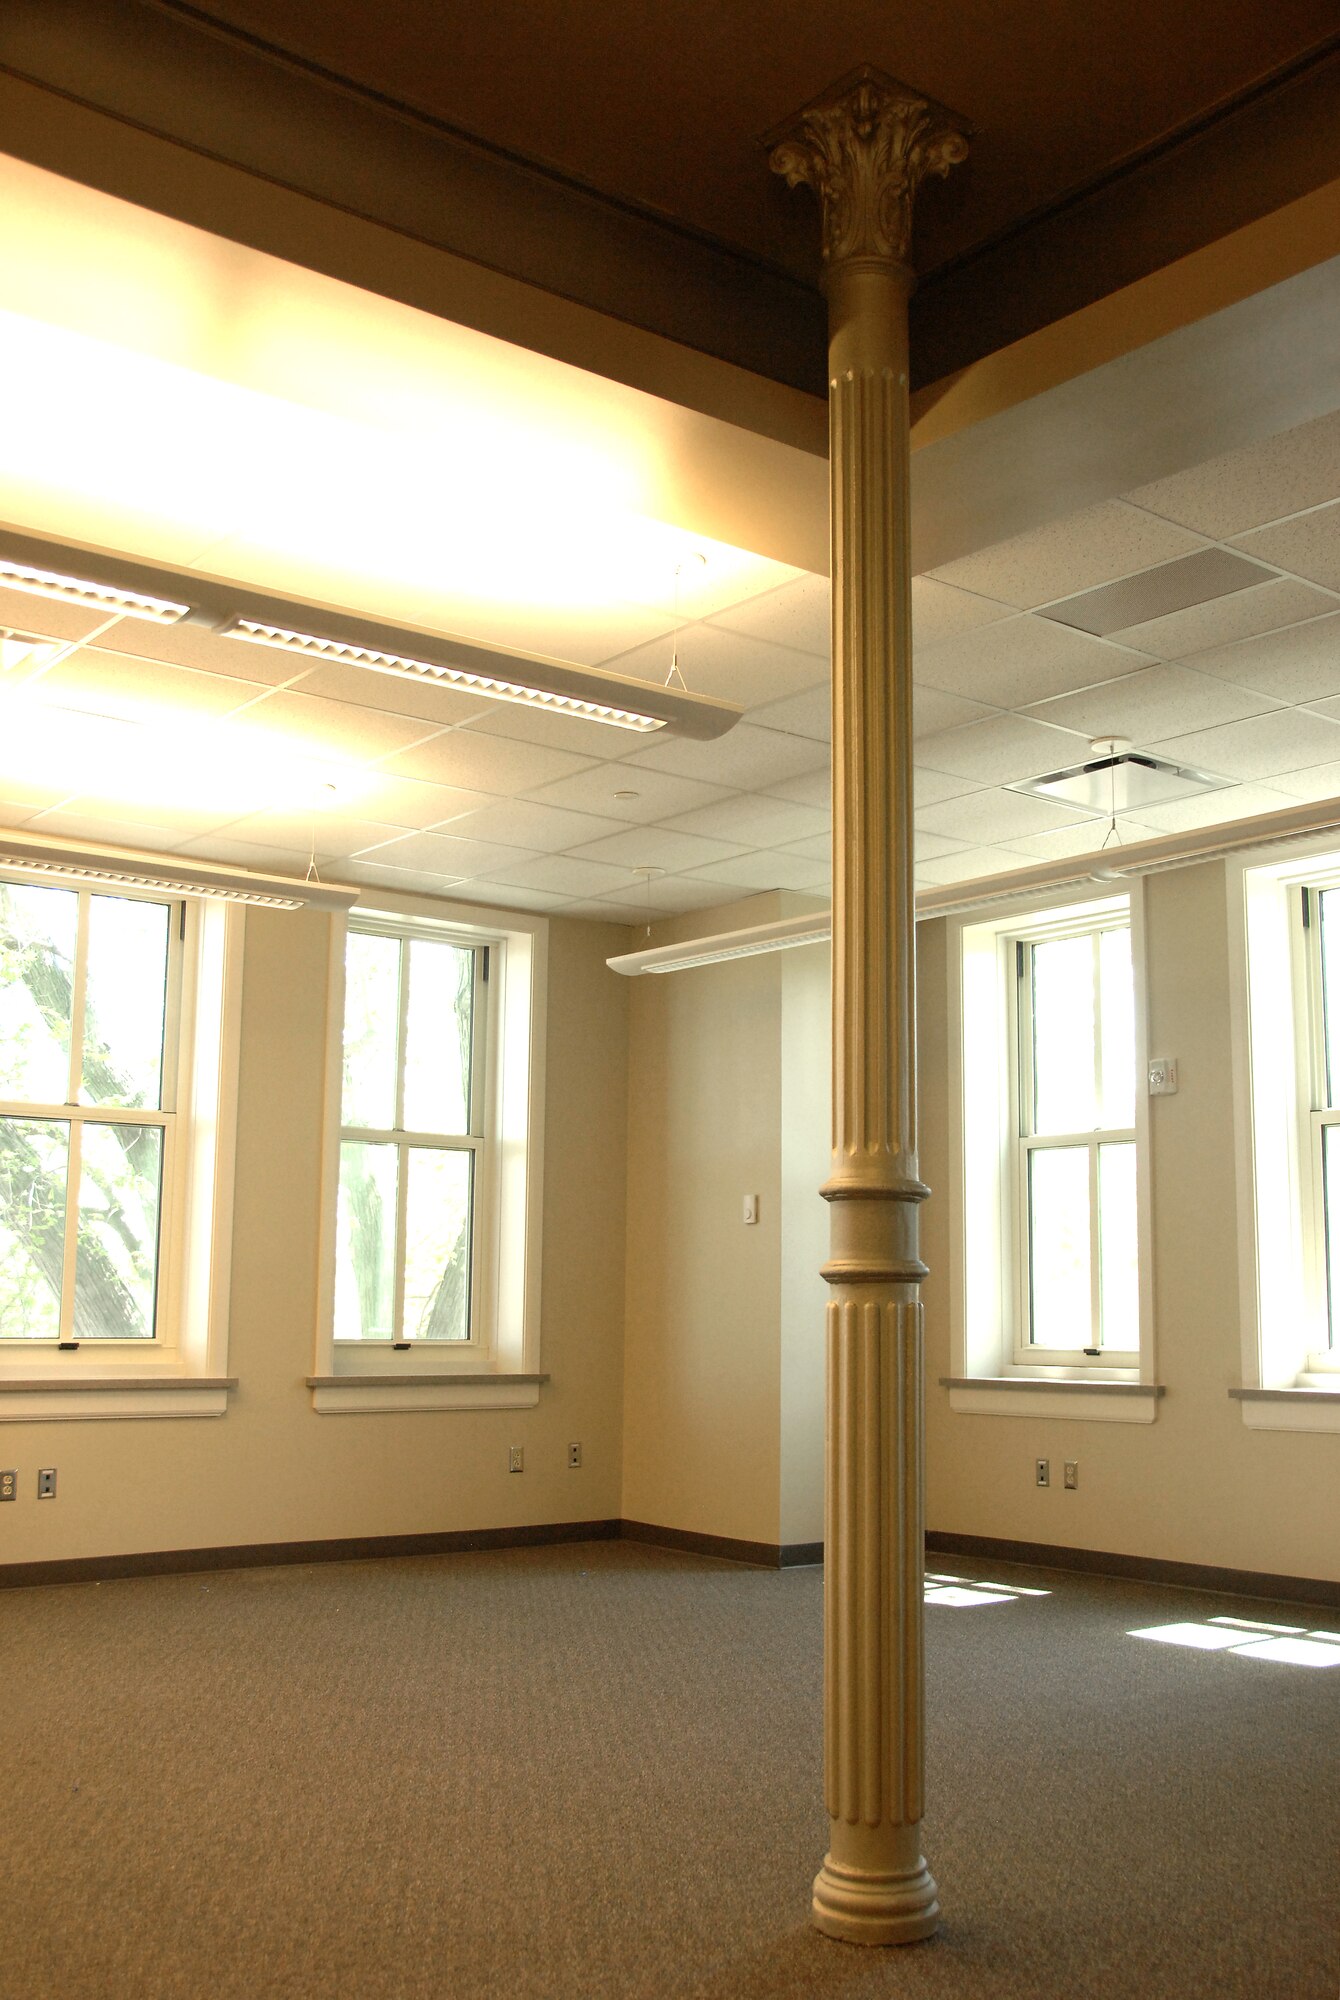 Cast iron columns such as this are located throughout Building 49 and were refinished as part of the plan to preserve the character of the building, which was built in 1894. The building is receiving $5 million in renovations that are scheduled for completion later this summer. The updates will provide 32,000 square feet of office space for the 55th Mission Support Group and 55th Force Support Squadron. (U.S. Air Force photo/Delanie Stafford)